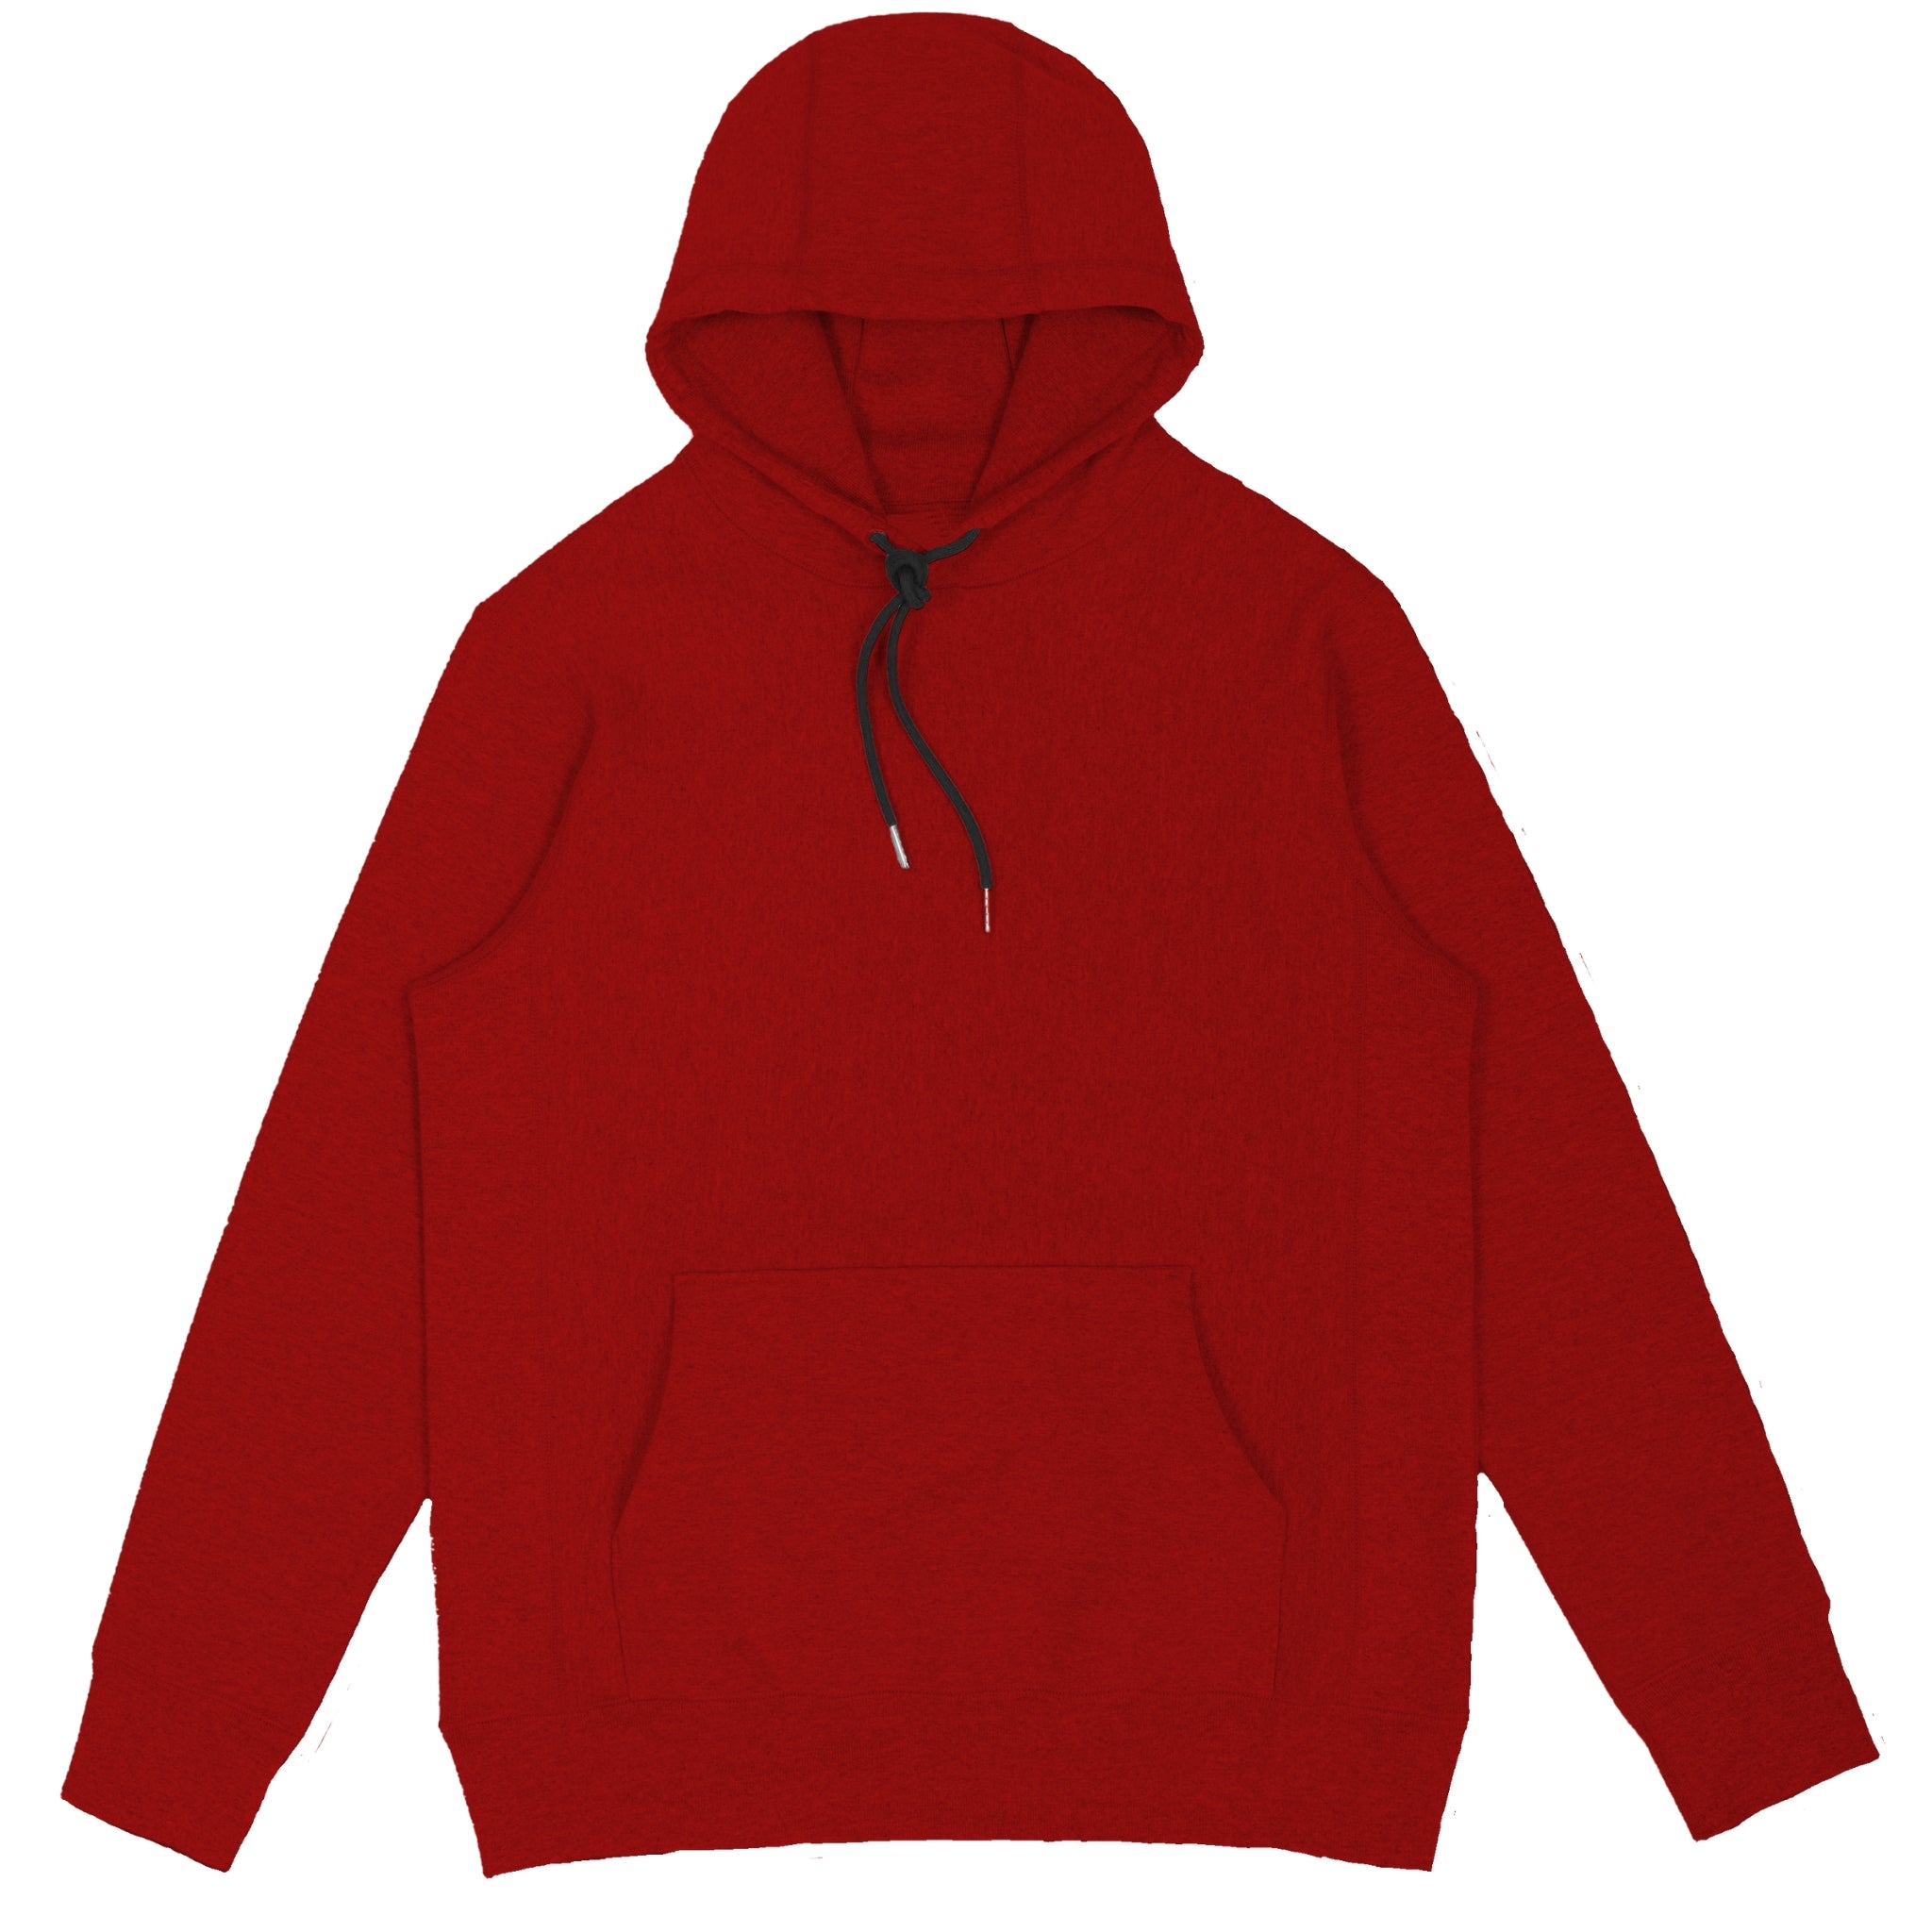 Heavyweight hoodie in red cotton facing the camera on a white background.